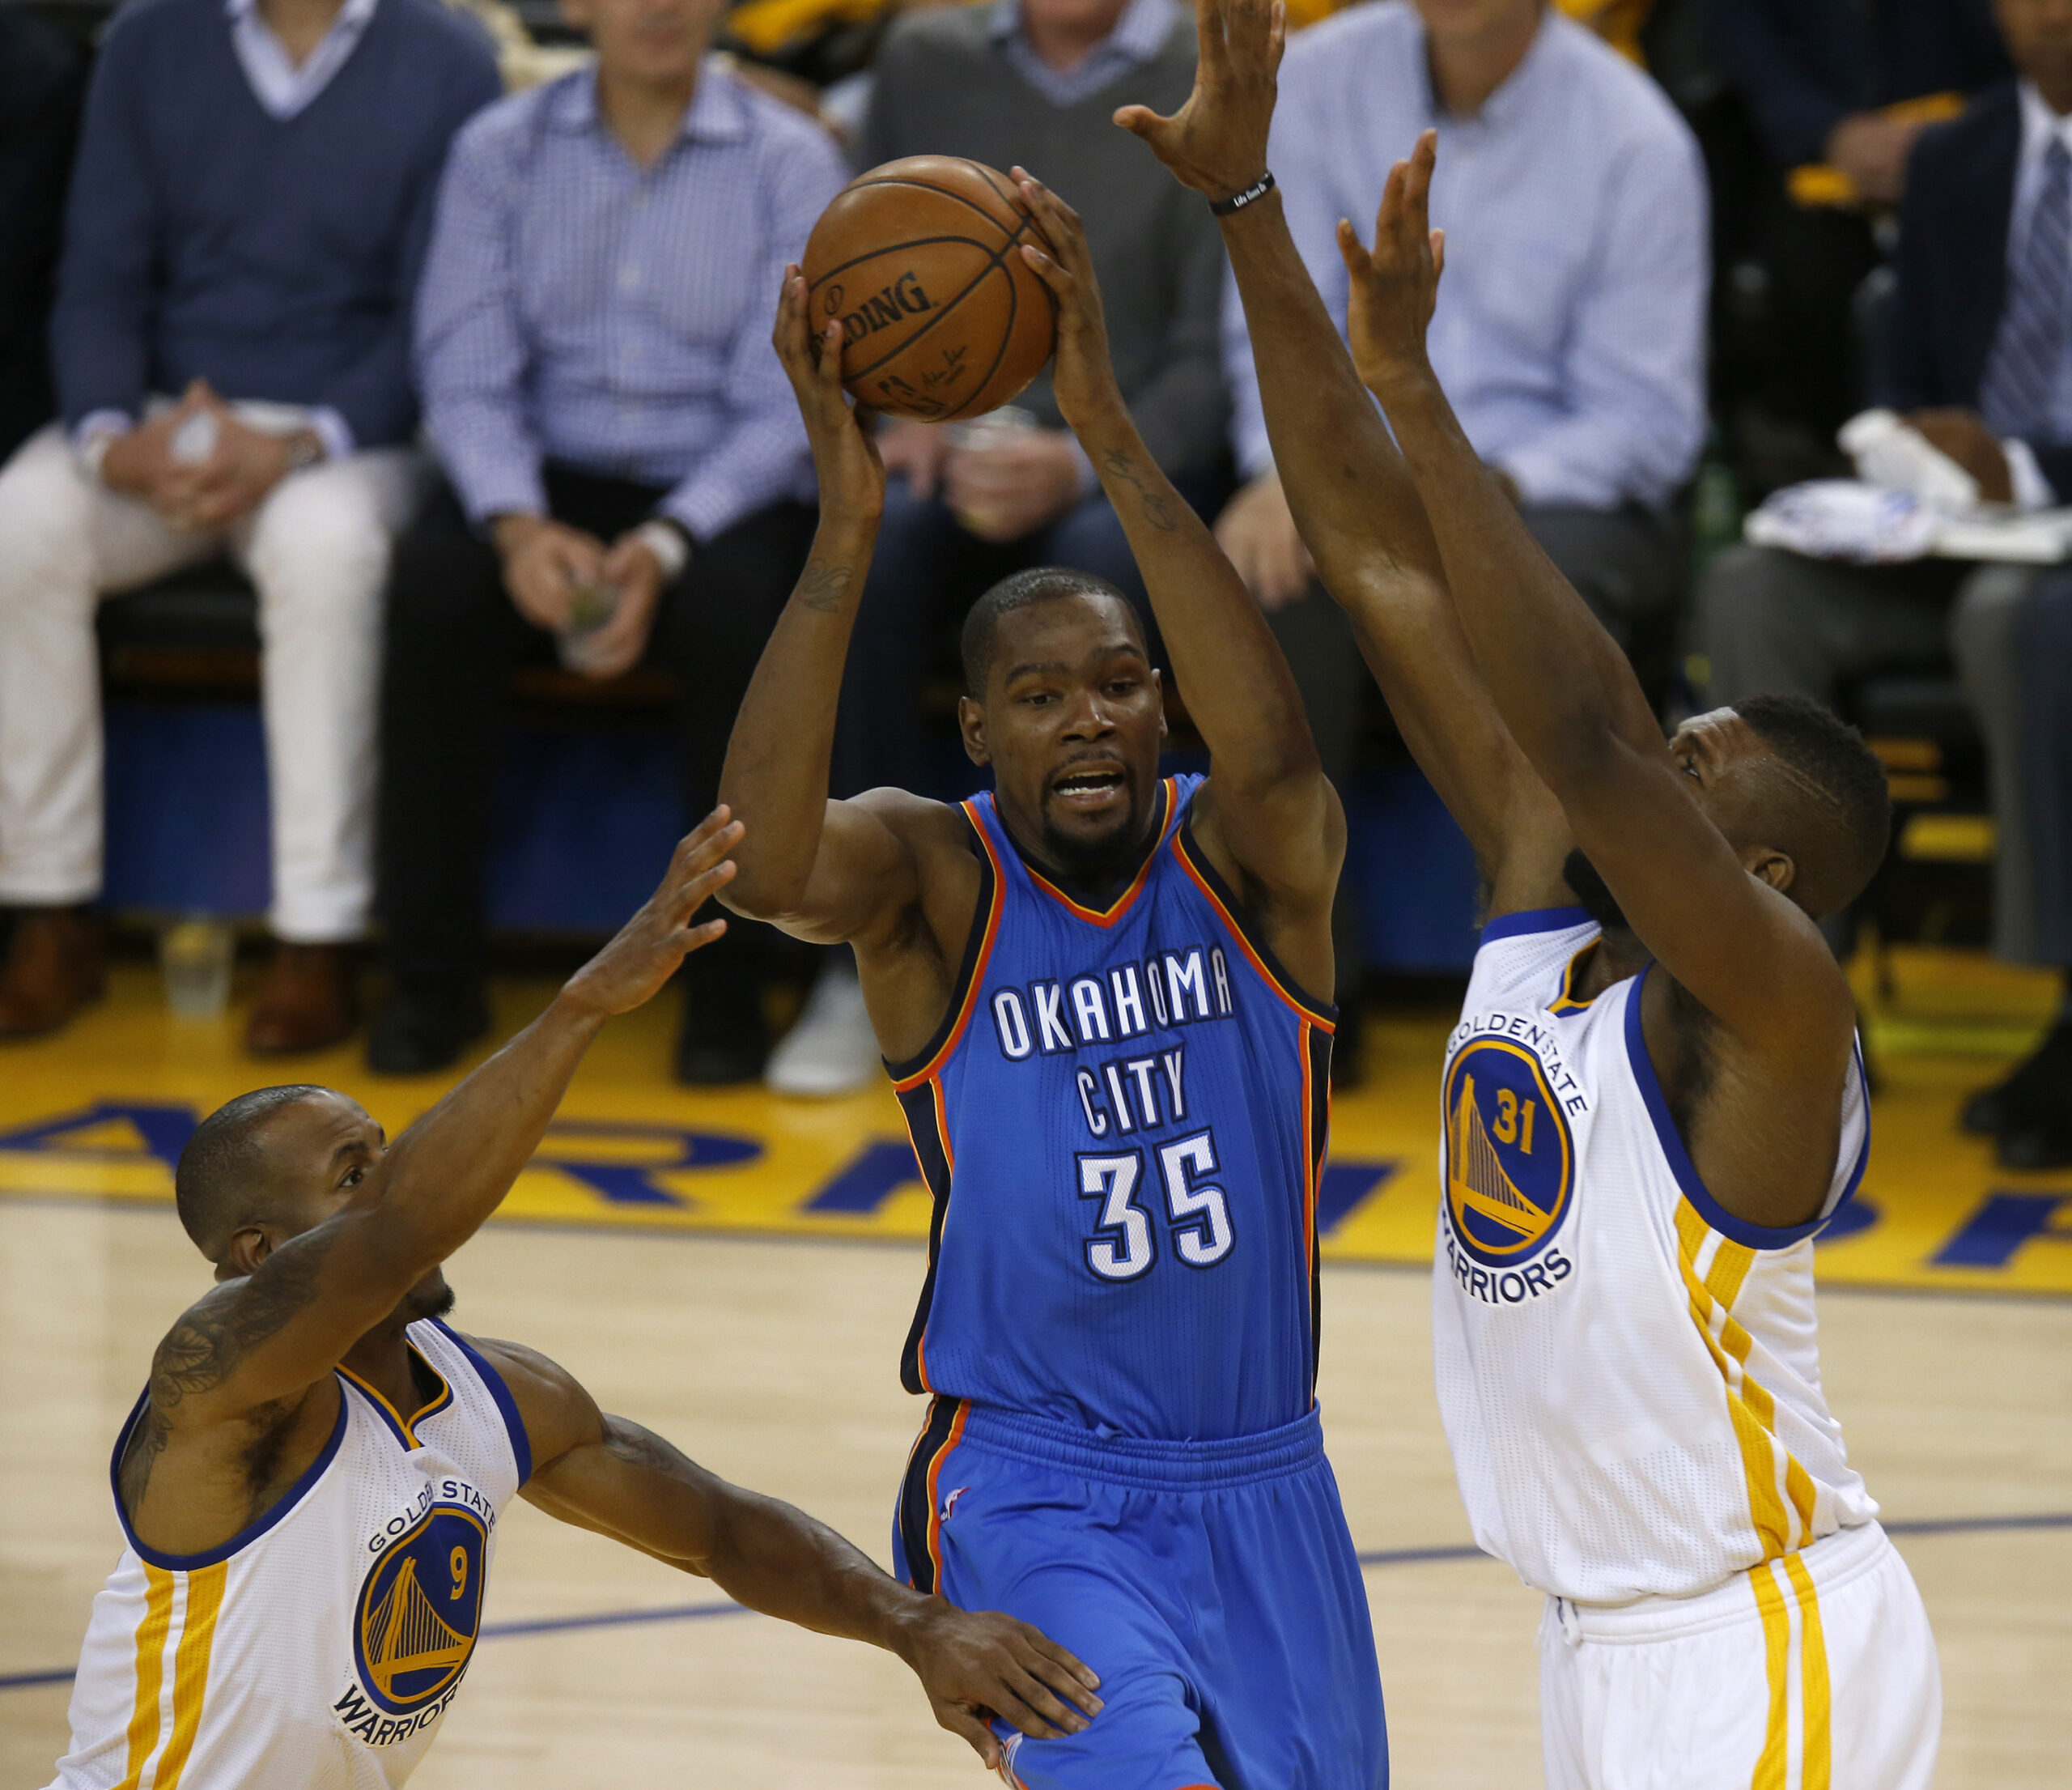 No Loyalty for Kevin Durant – The Telescope